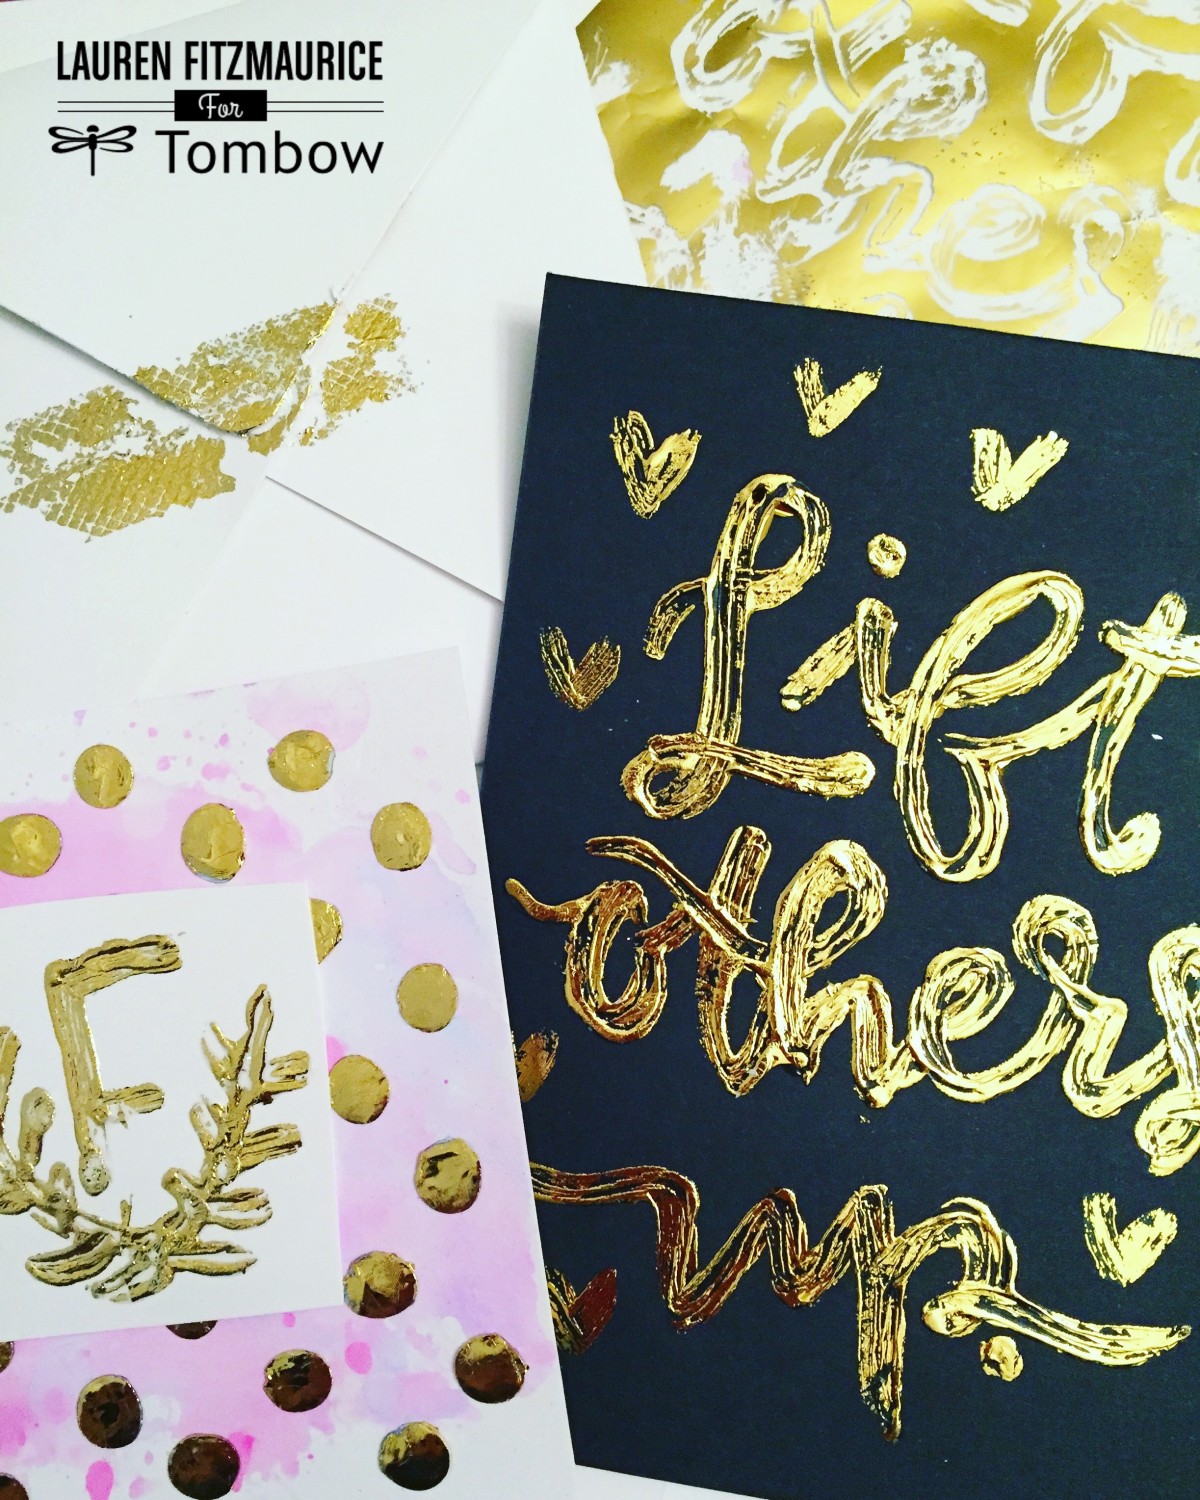 Fun foil projects to create with Tombow!